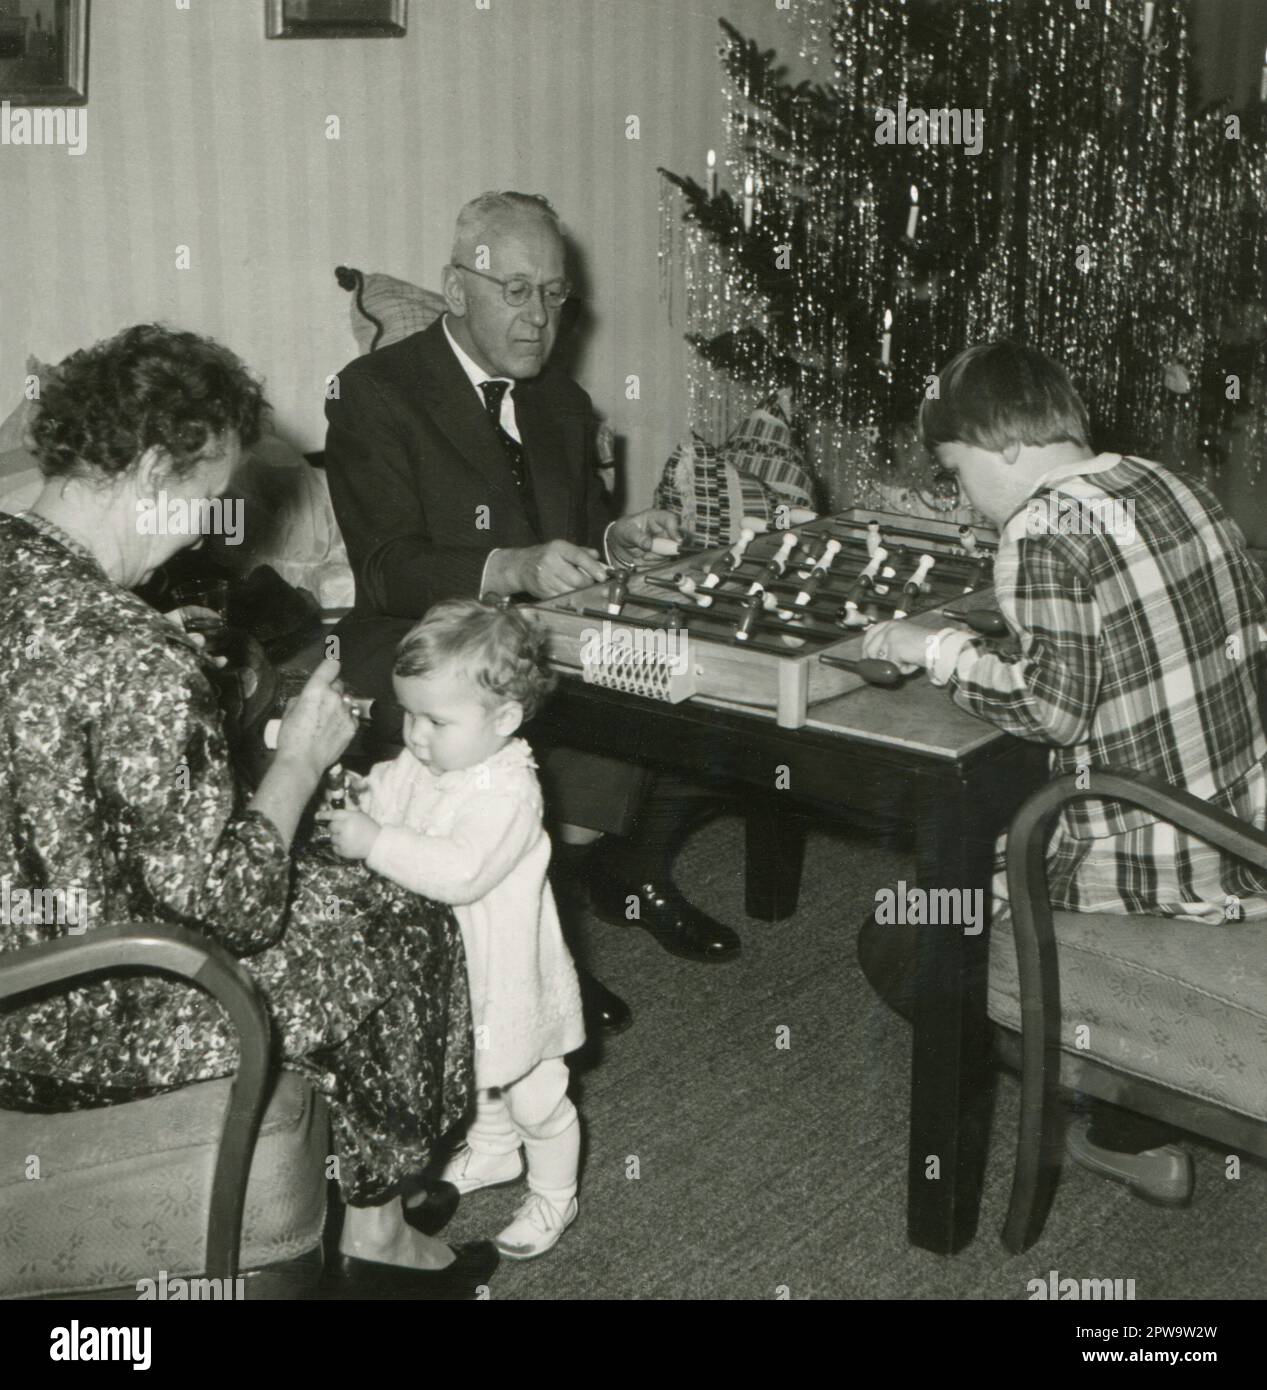 Germany. 1960s. Grandparents with their grandchildren at Christmas. A grandfather is playing a table football game with his granddaughter, whilst a grandmother is paying attention to her infant grandchild. In the background is a Christmas tree decorated with lametta tinsel and lit candles. Stock Photo